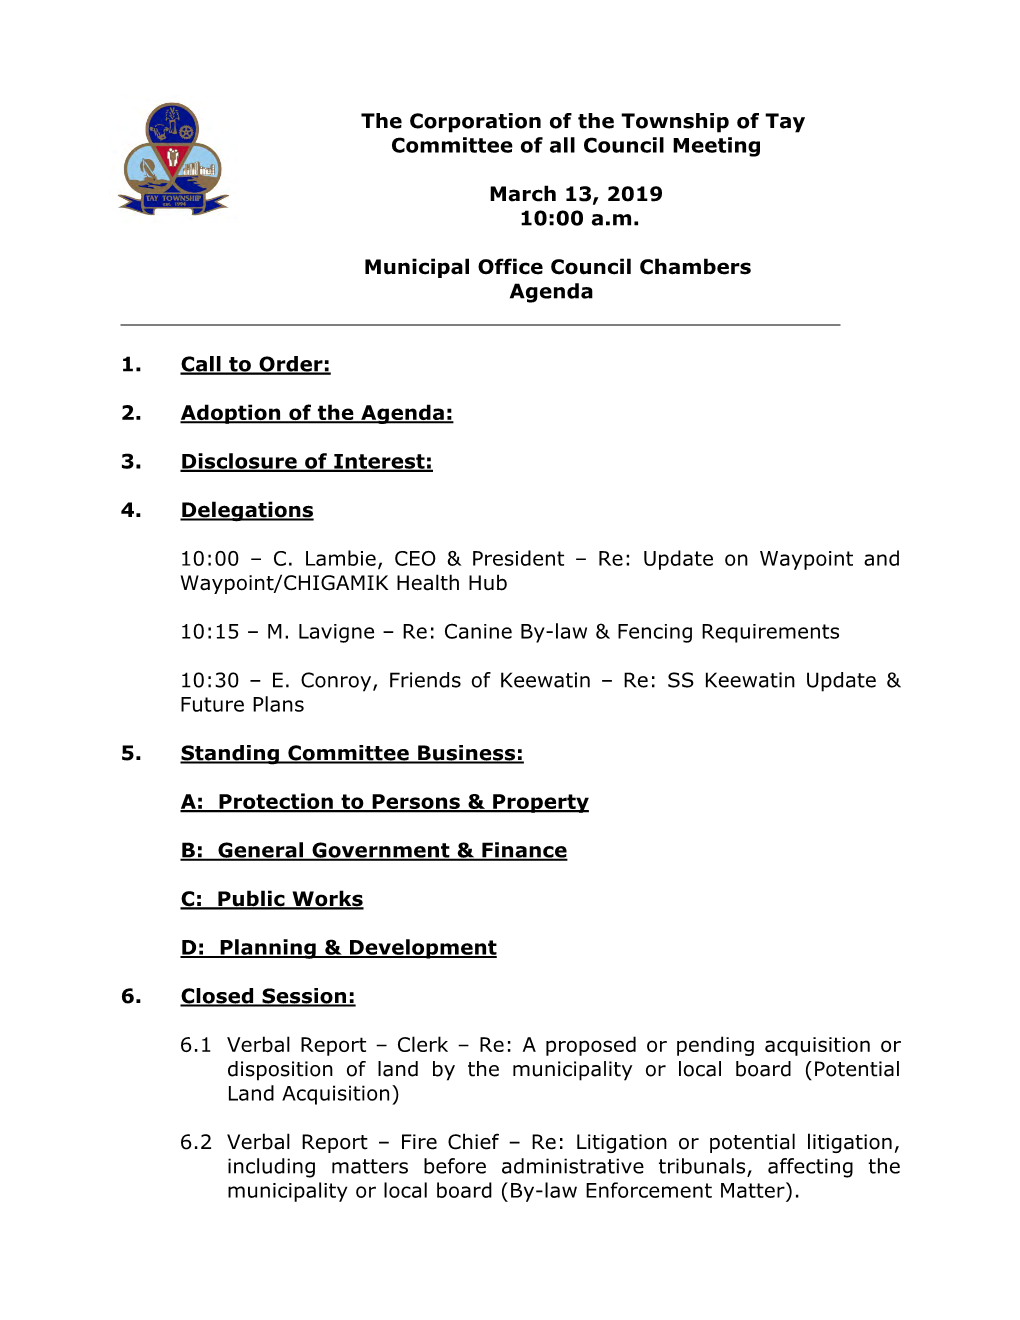 The Corporation of the Township of Tay Committee of All Council Meeting March 13, 2019 10:00 A.M. Municipal Office Council Chamb